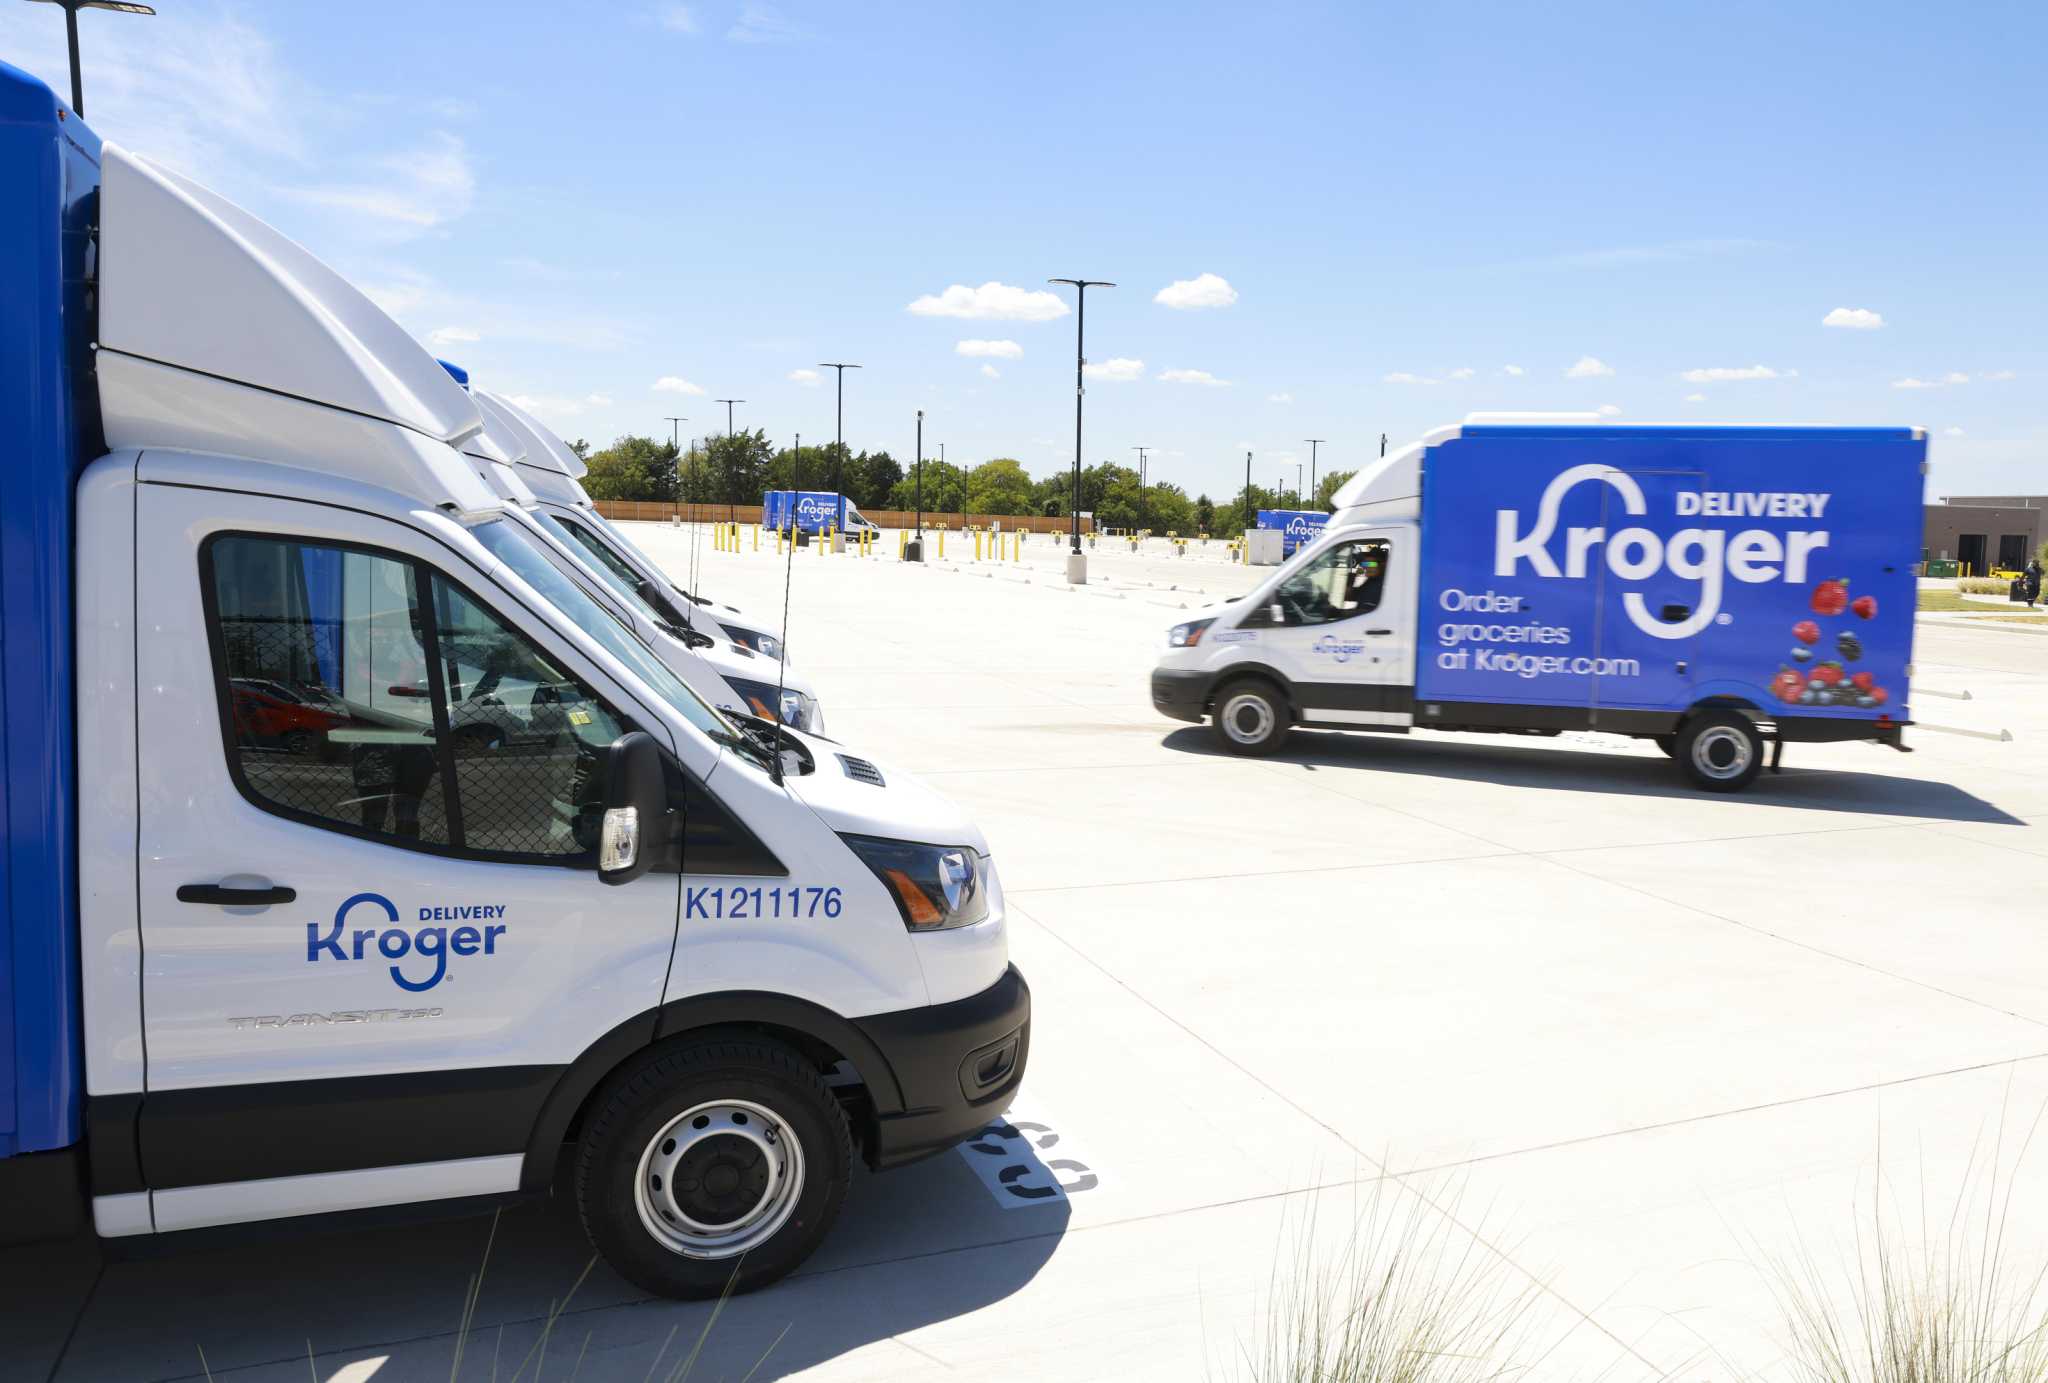 Kroger in San Antonio: Grocer launches delivery service